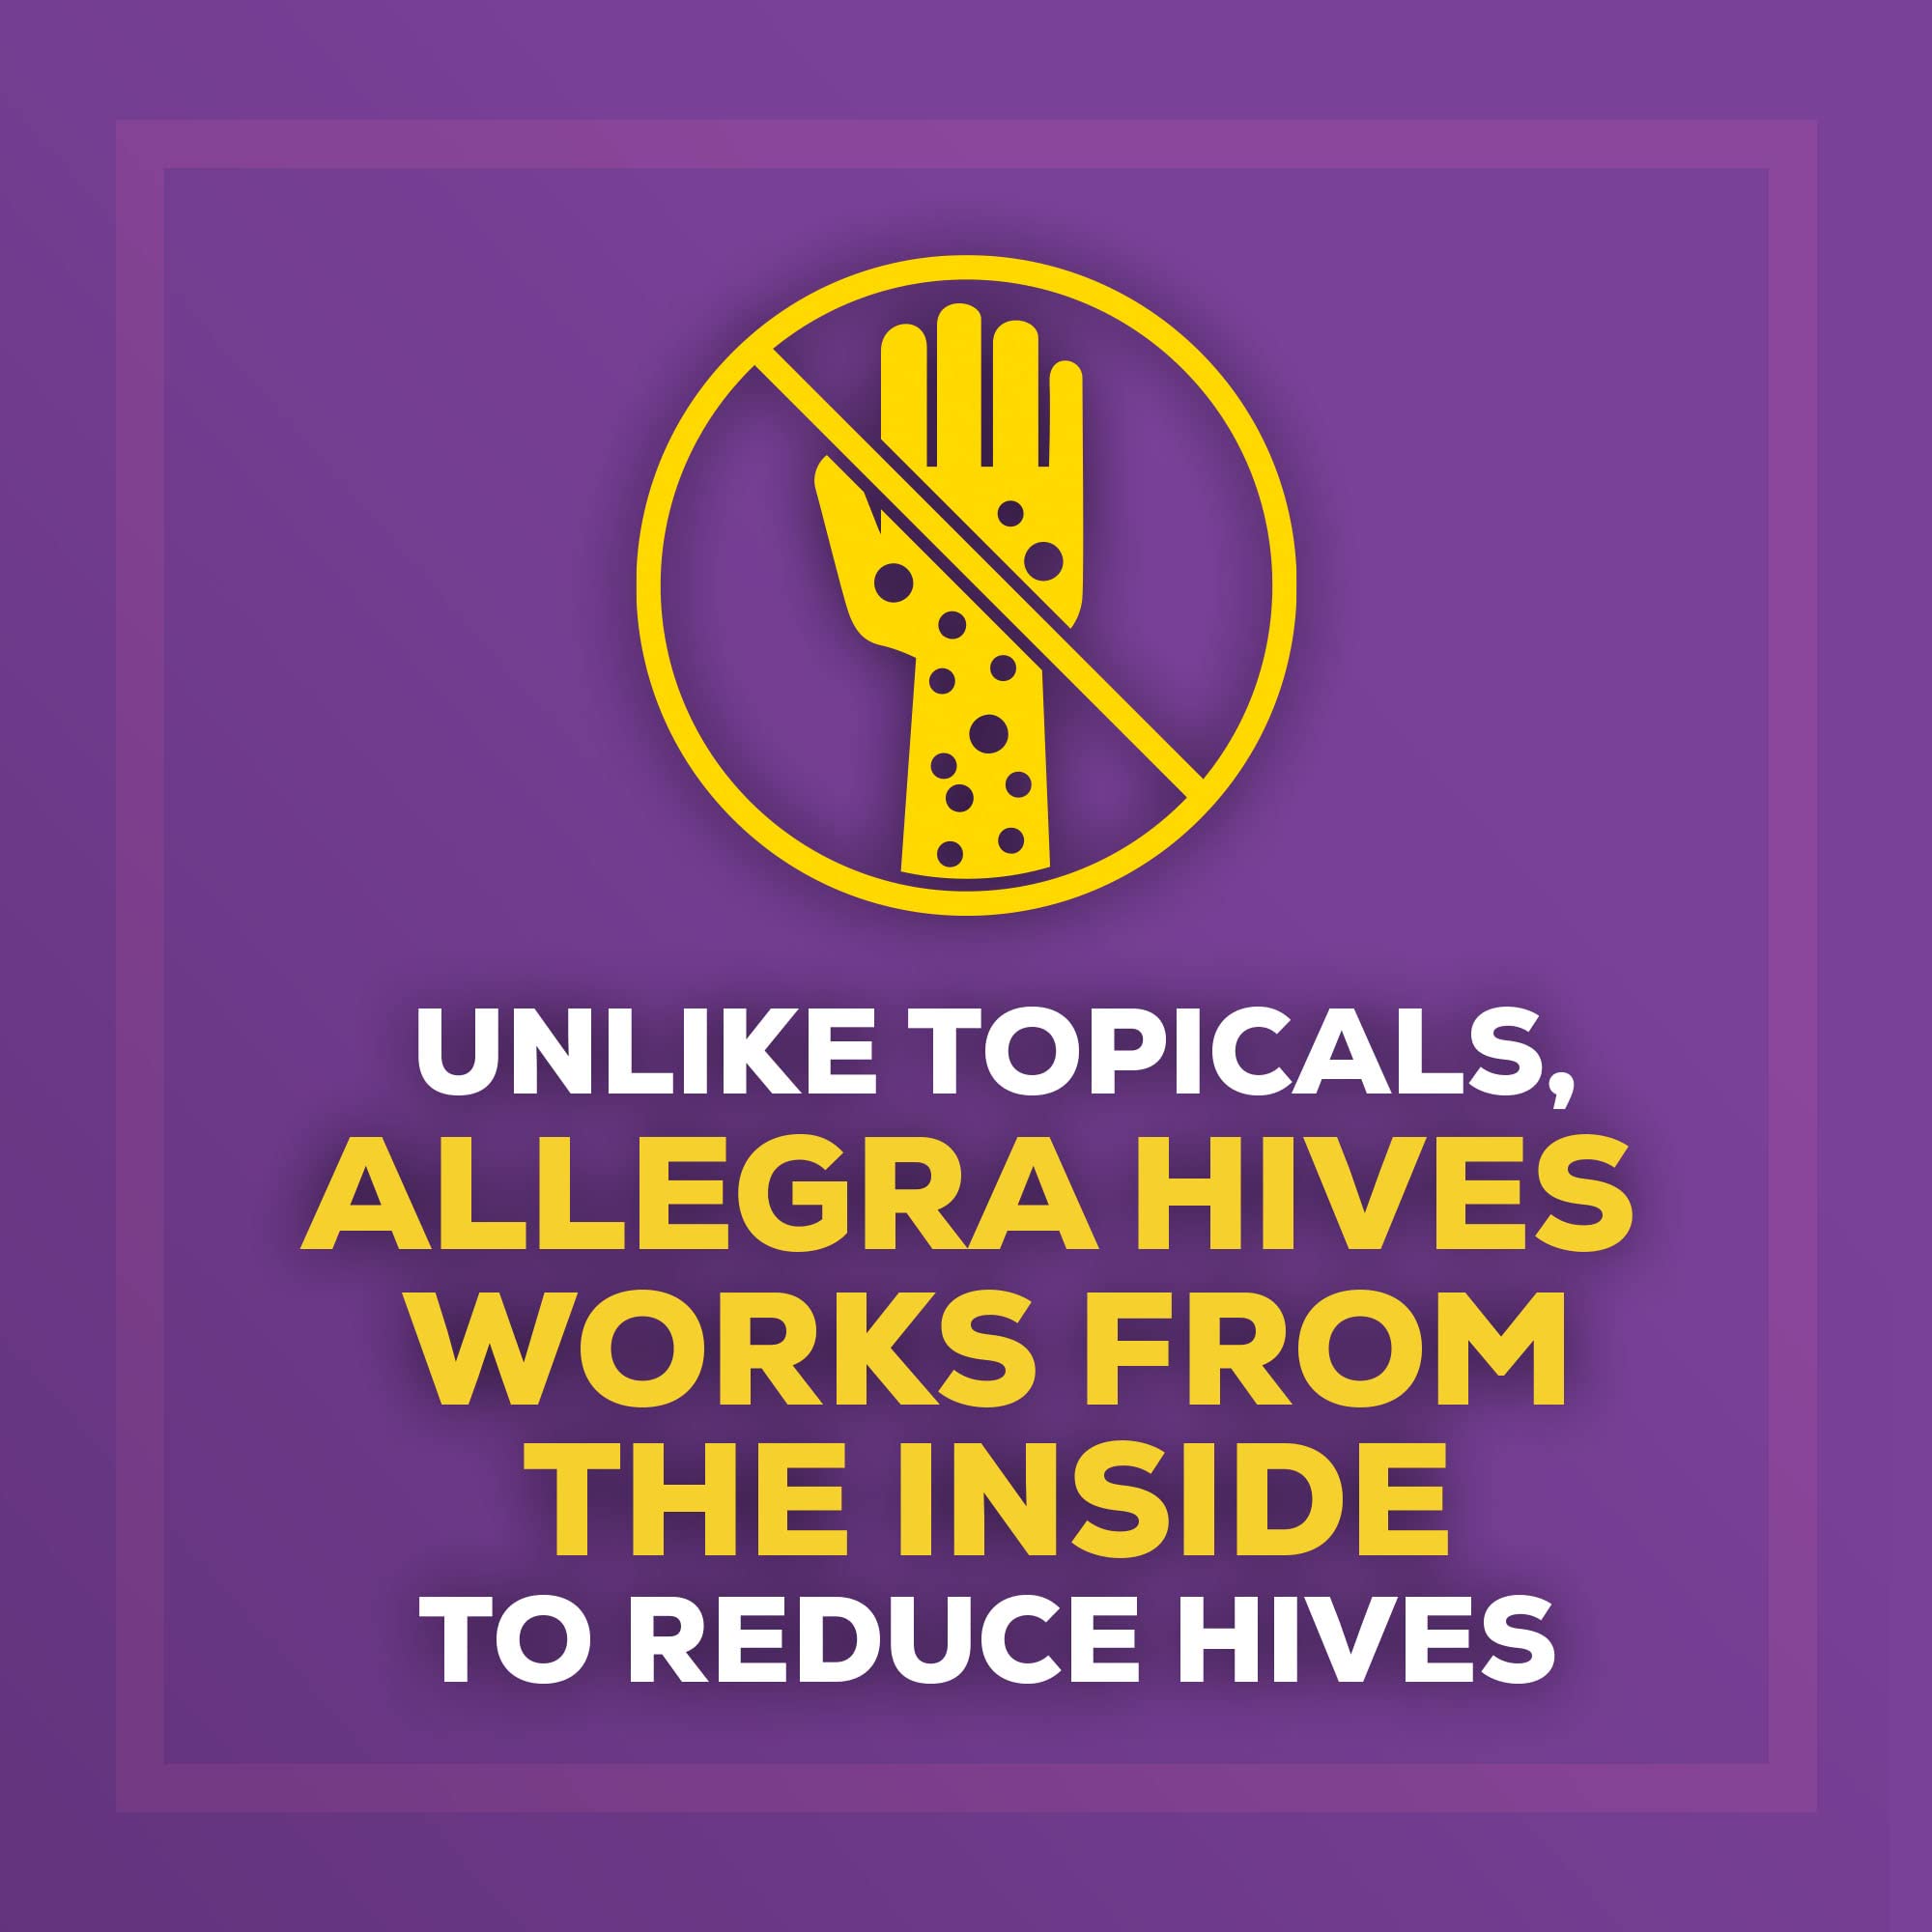 Allegra Hives Non-Drowsy Antihistamine Tablets, 30-Count, 24HR Hives Reduction & Itch Relief, 180mg